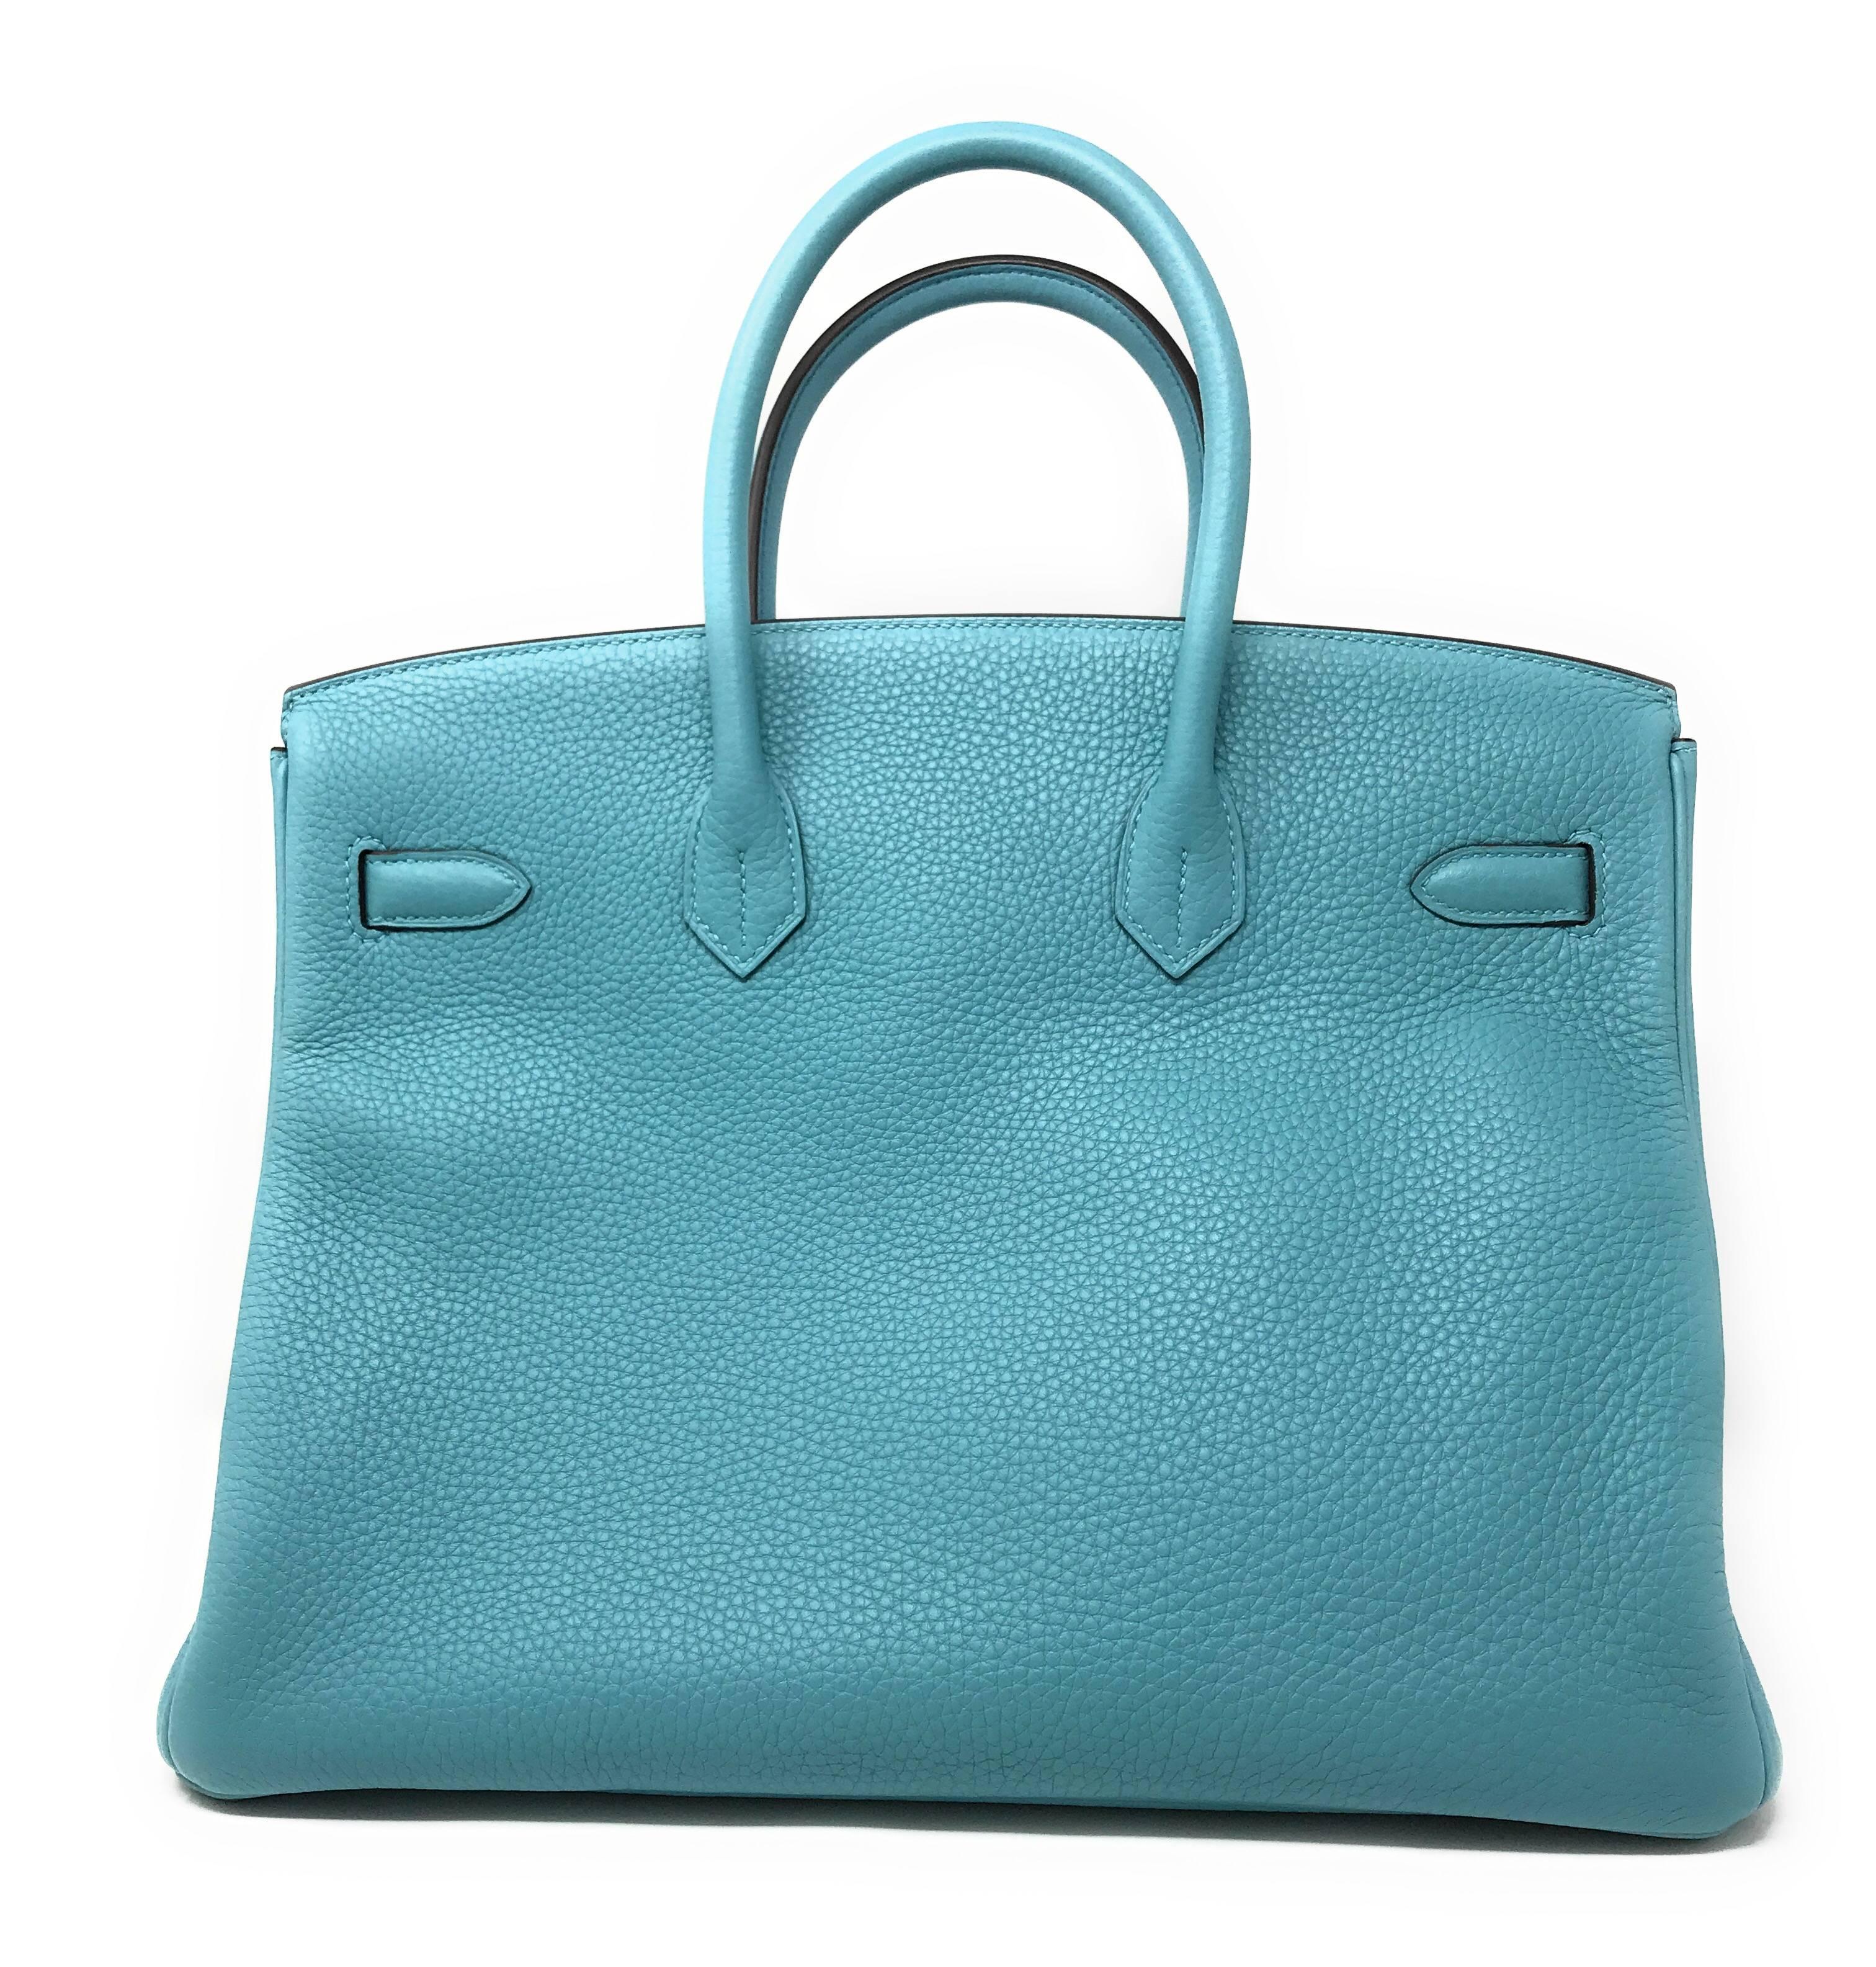 Hermes Bleu Saint, a serene and calm blue that signifies the color of this 35cm Birkin bag. 
It is crafted of scratch resistant yet soft Clemence leather accented by Palladium hardware adding cool elegance to a truly timeless handbag. 
This bag has